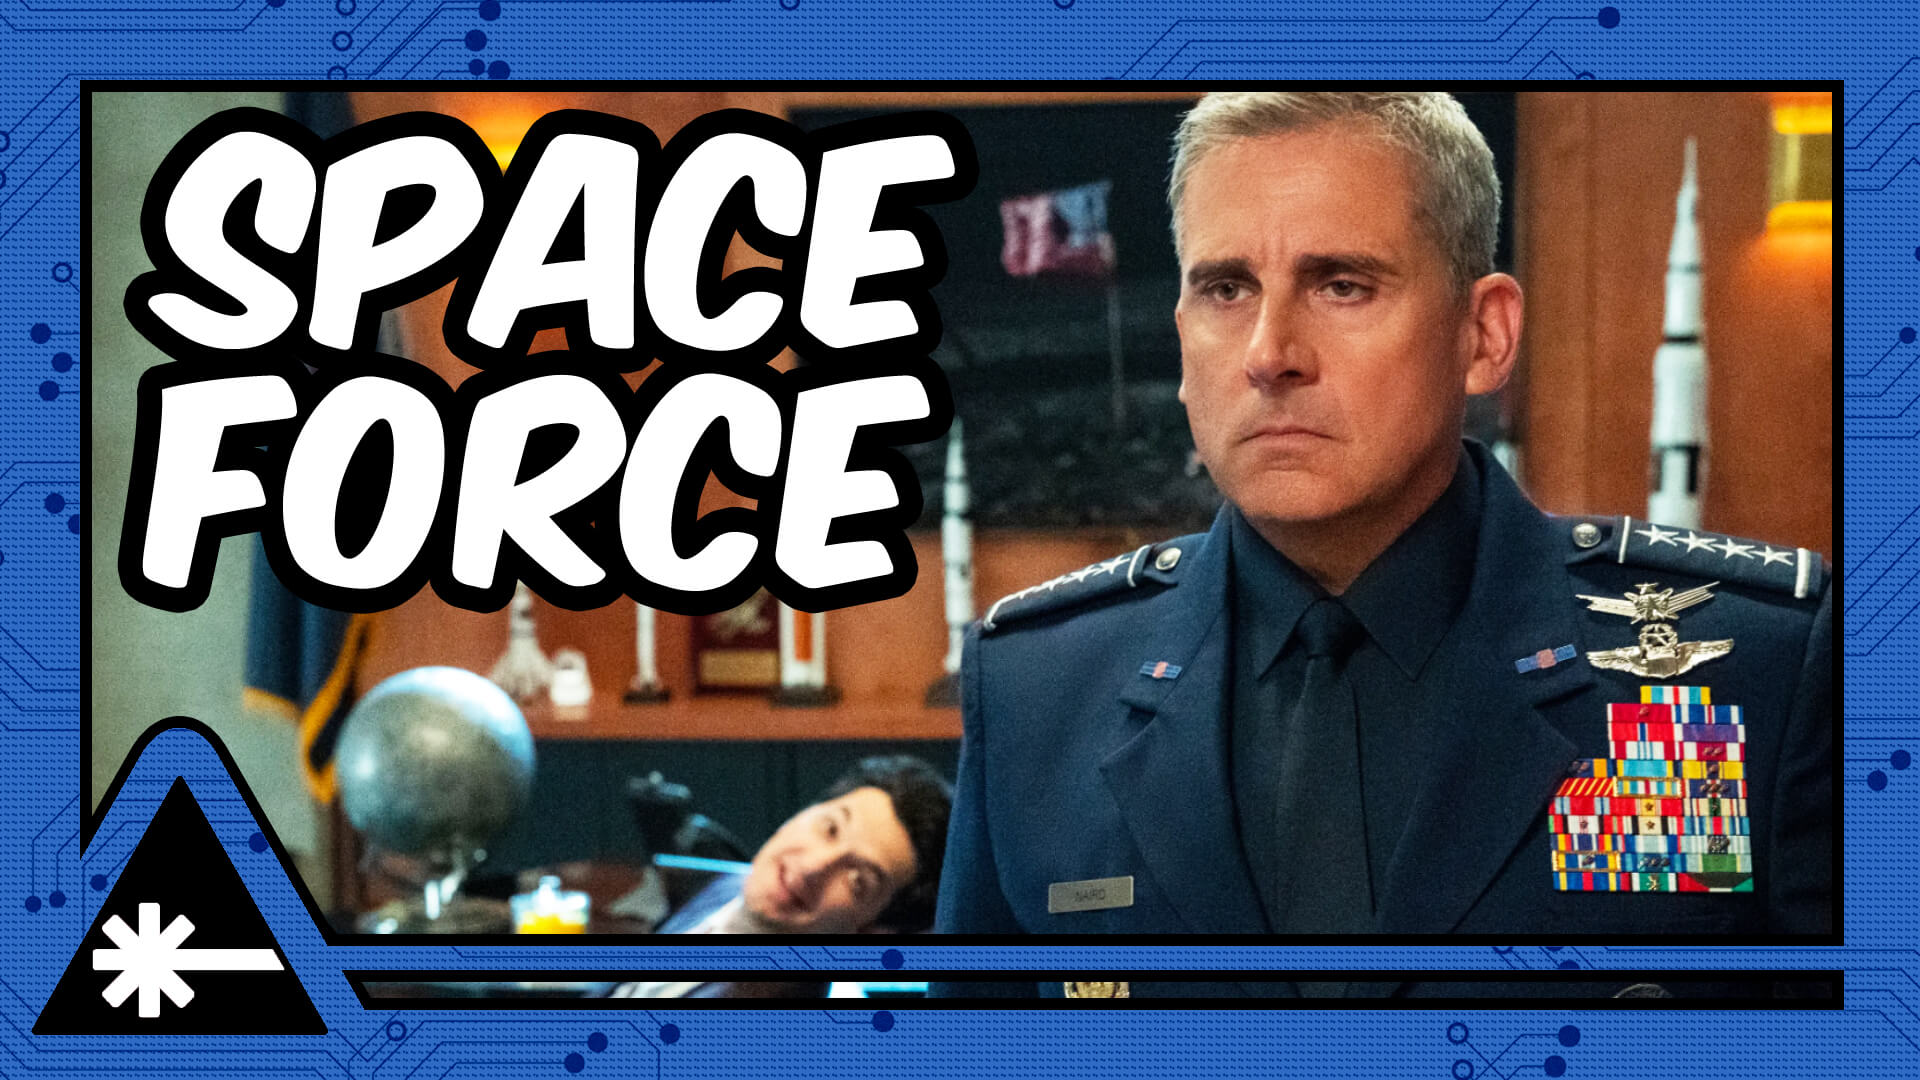 space force